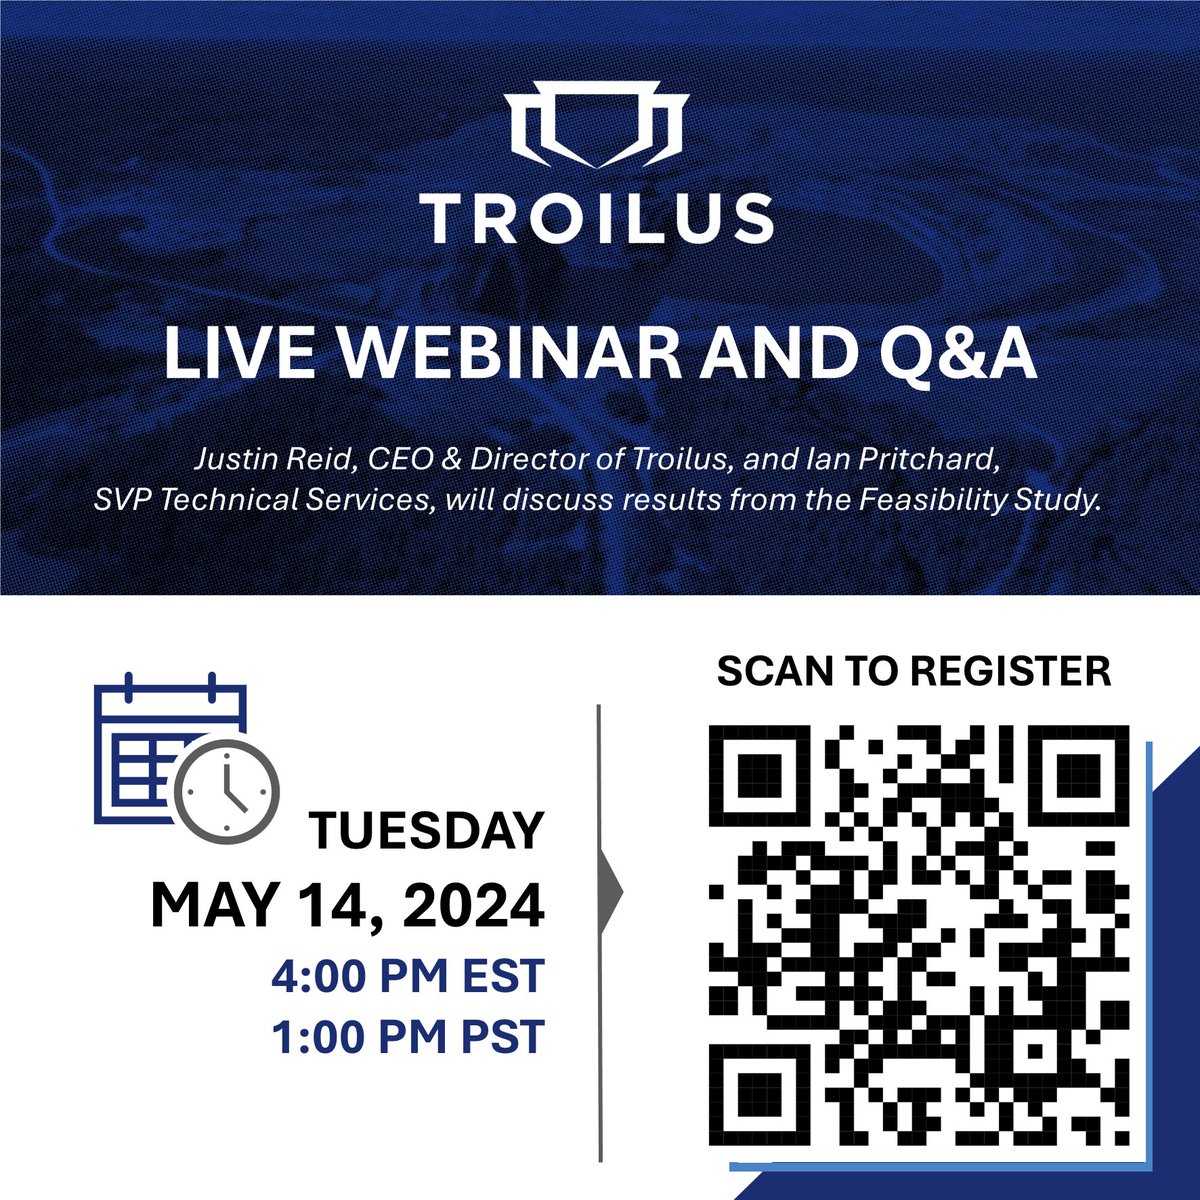 Troilus is hosting a webinar and Q&A with Justin Reid, CEO and Director, and Ian Pritchard, SVP Technical Services, TODAY, May 14, 2024, at 4:00 PM EST to discuss results of the Feasibility Study. Register here: bit.ly/3QJsPAO. $TLG $CHXMF $CM5R #gold #copper #mining